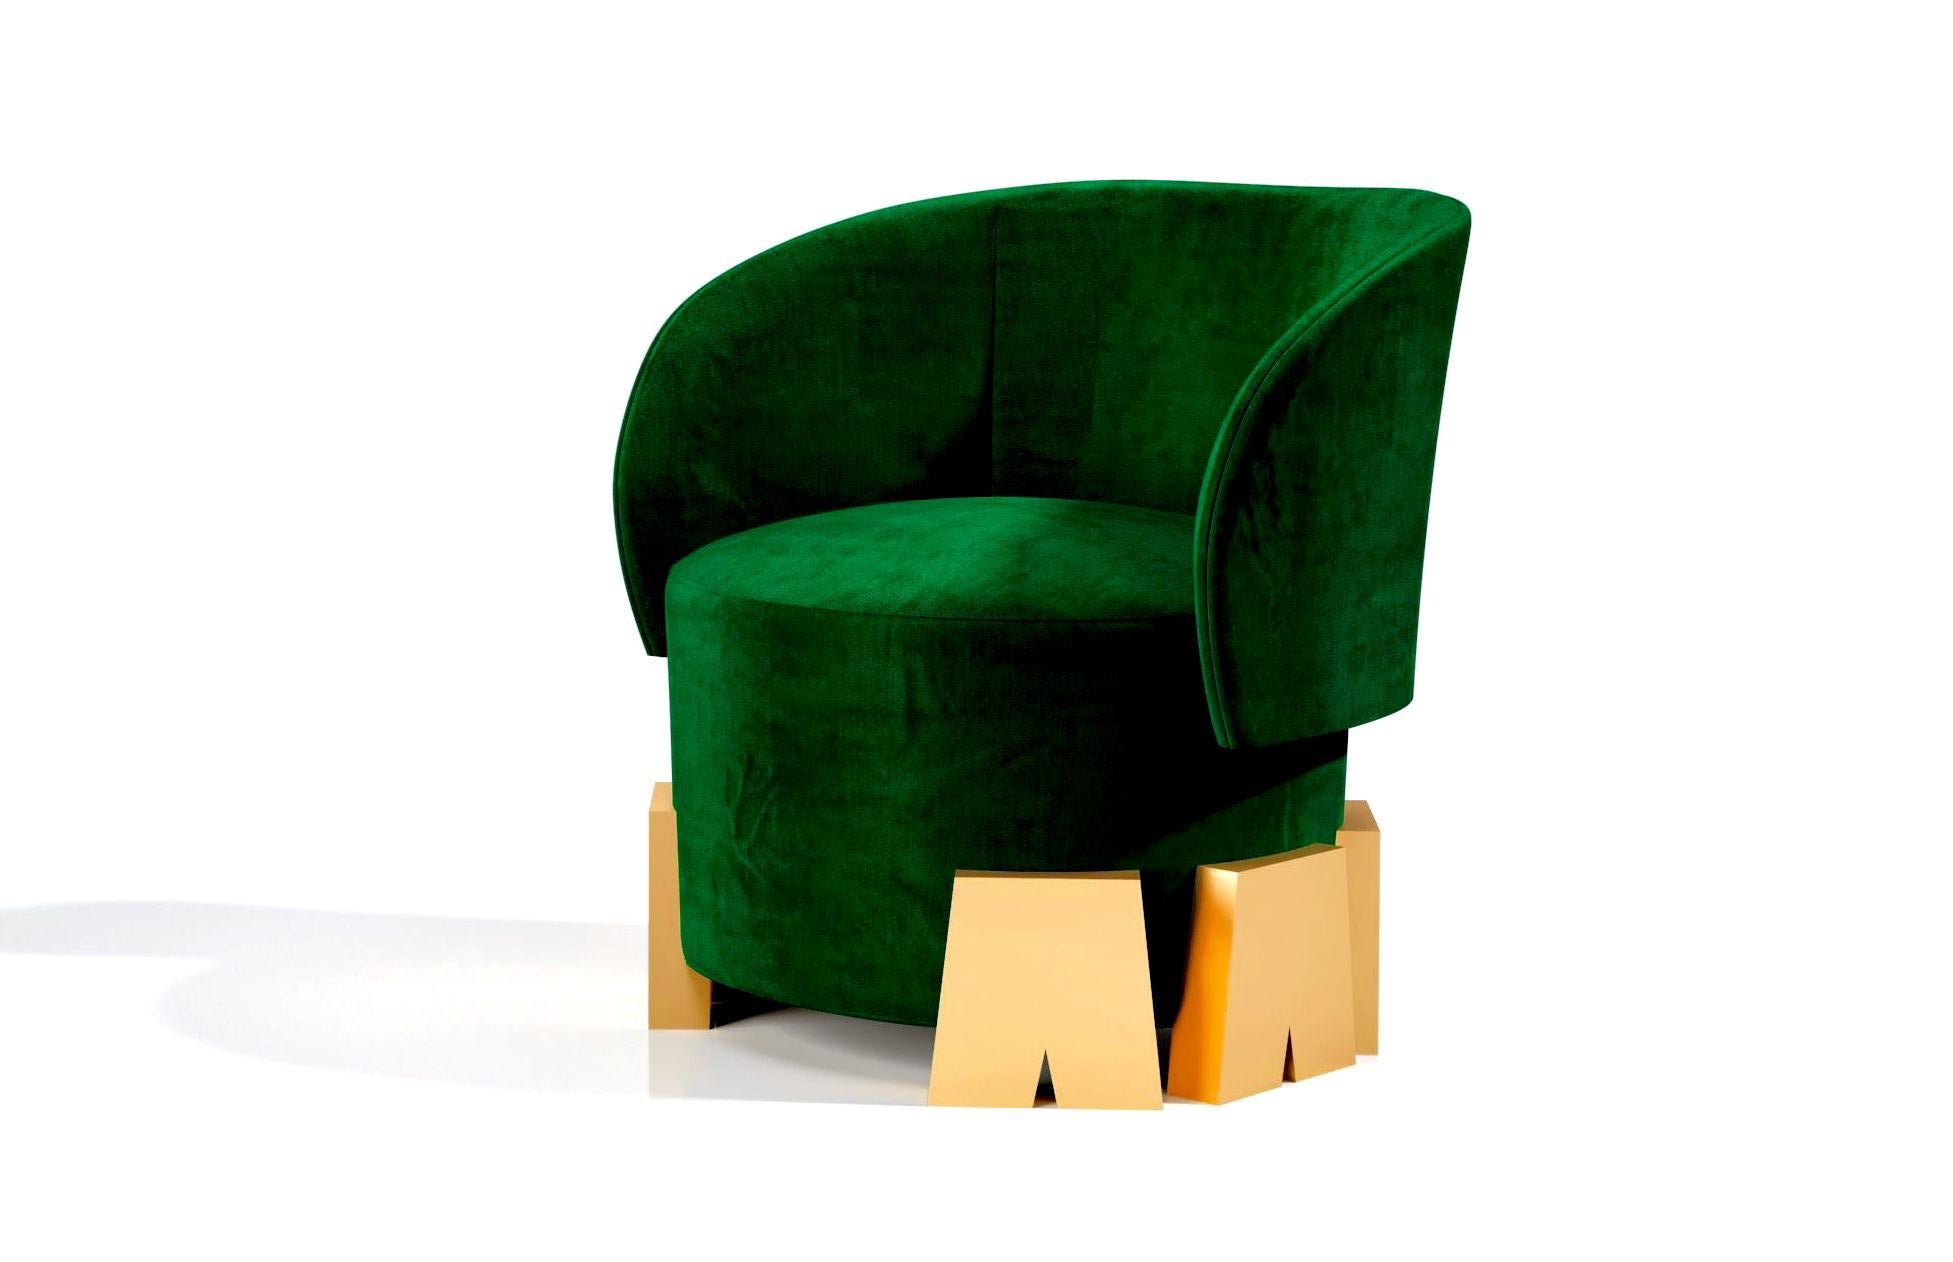 Green Alpine armchair by Kasadamo
Dimensions: D 65 x W 60 x H 69 cm
Materials: suede, brass
Also available: customized colors available.


Kasadamo is about uniqueness, visions and exclusivity, a brand that was designed to be different and